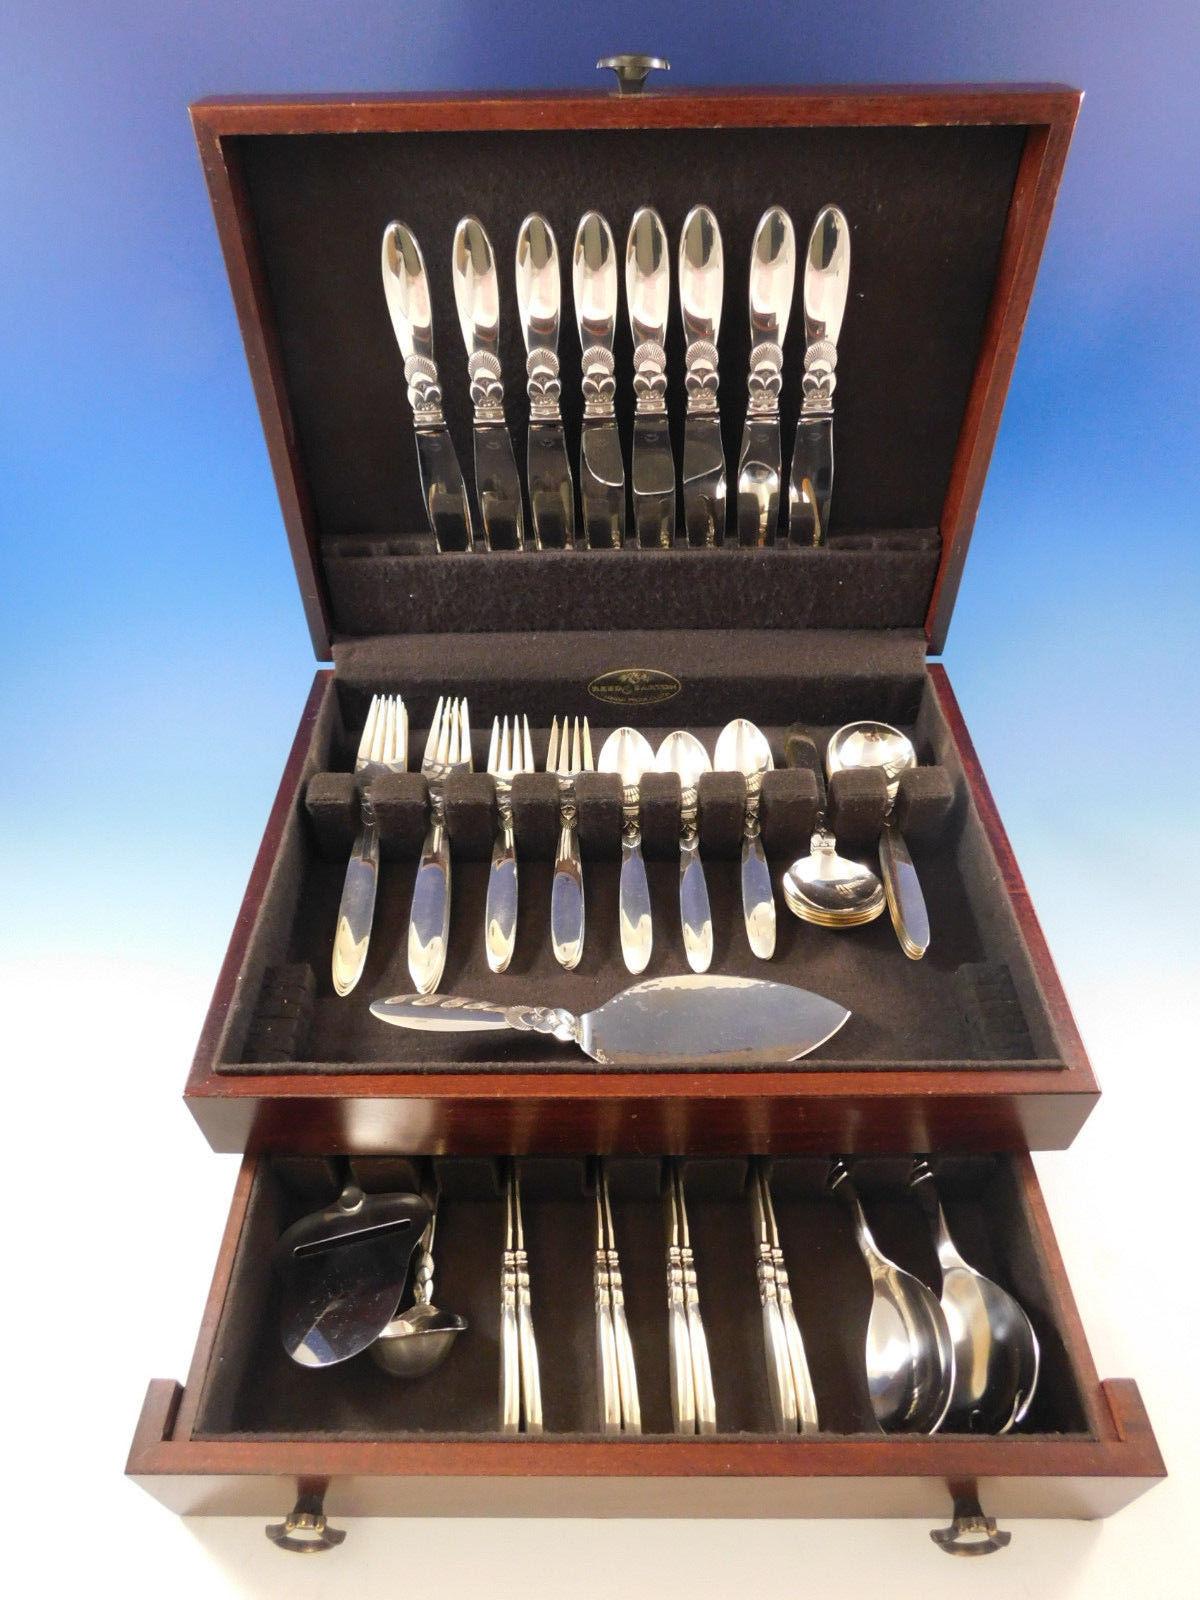 Dinner size cactus by Georg Jensen sterling silver flatware set, 53 pieces. This set includes:

Eight dinner knives, short handle, 9